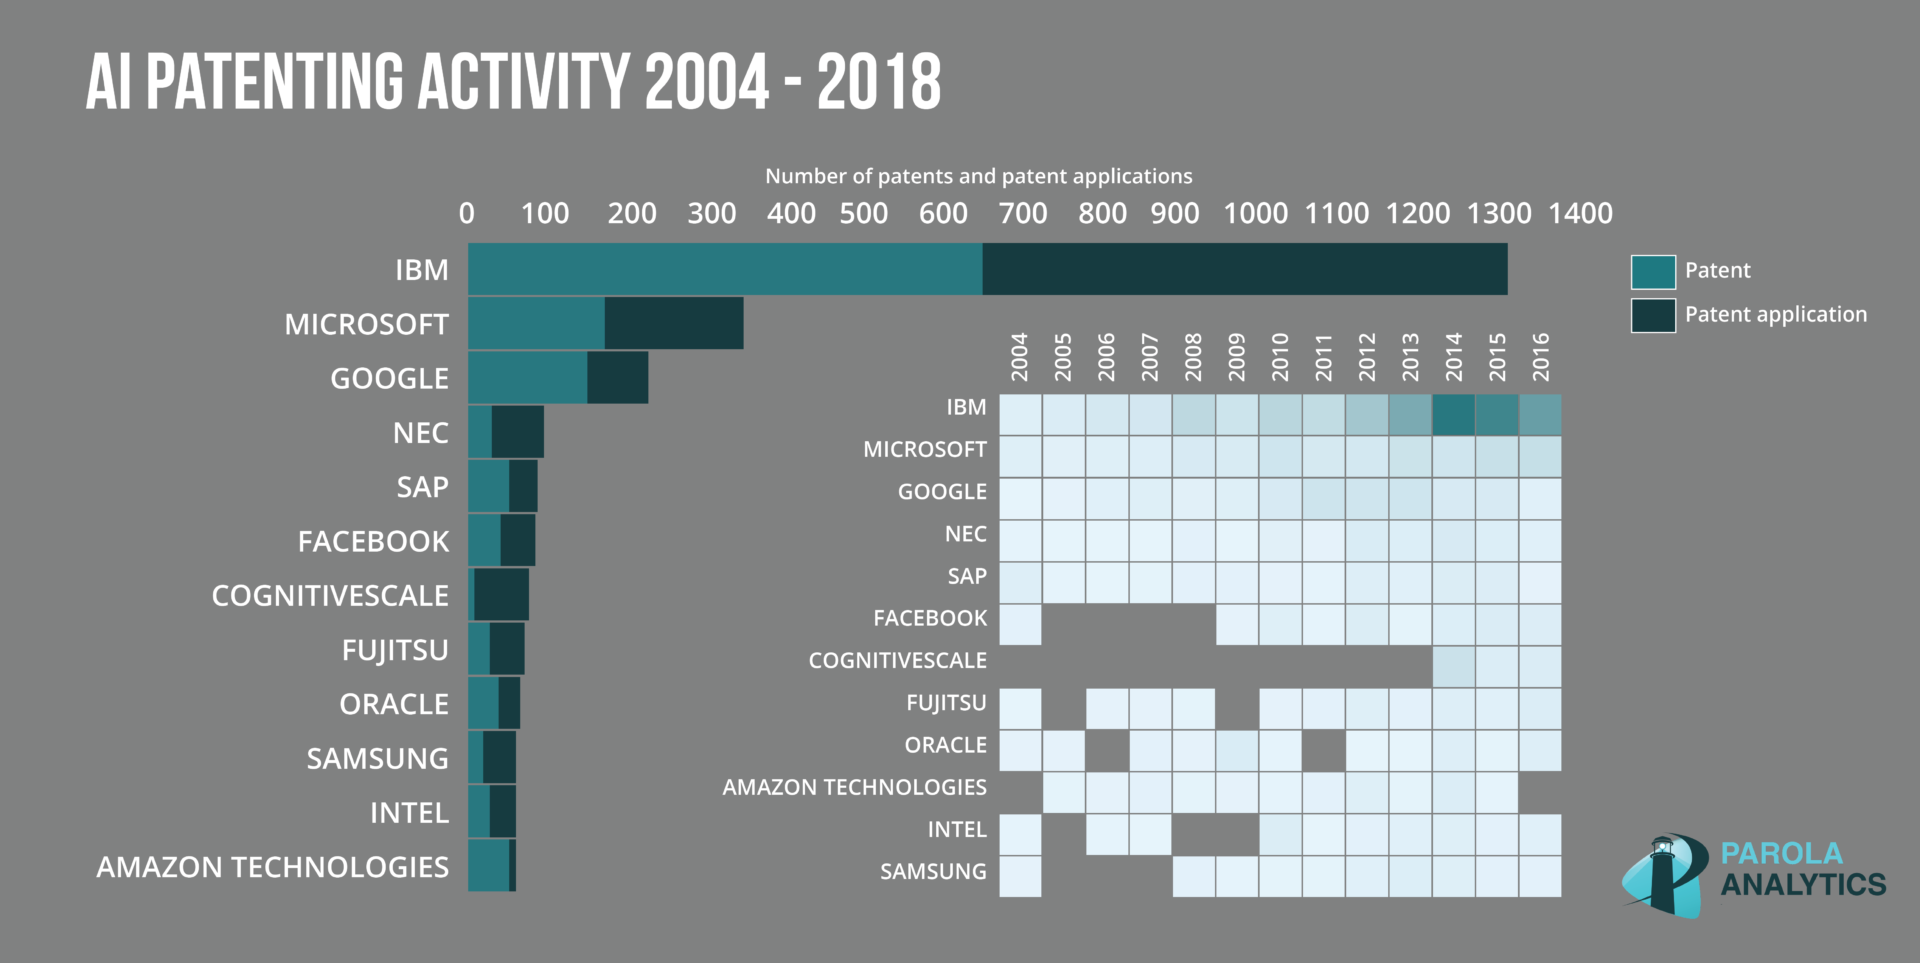 graph about AI patenting activity from 2004 to 2018